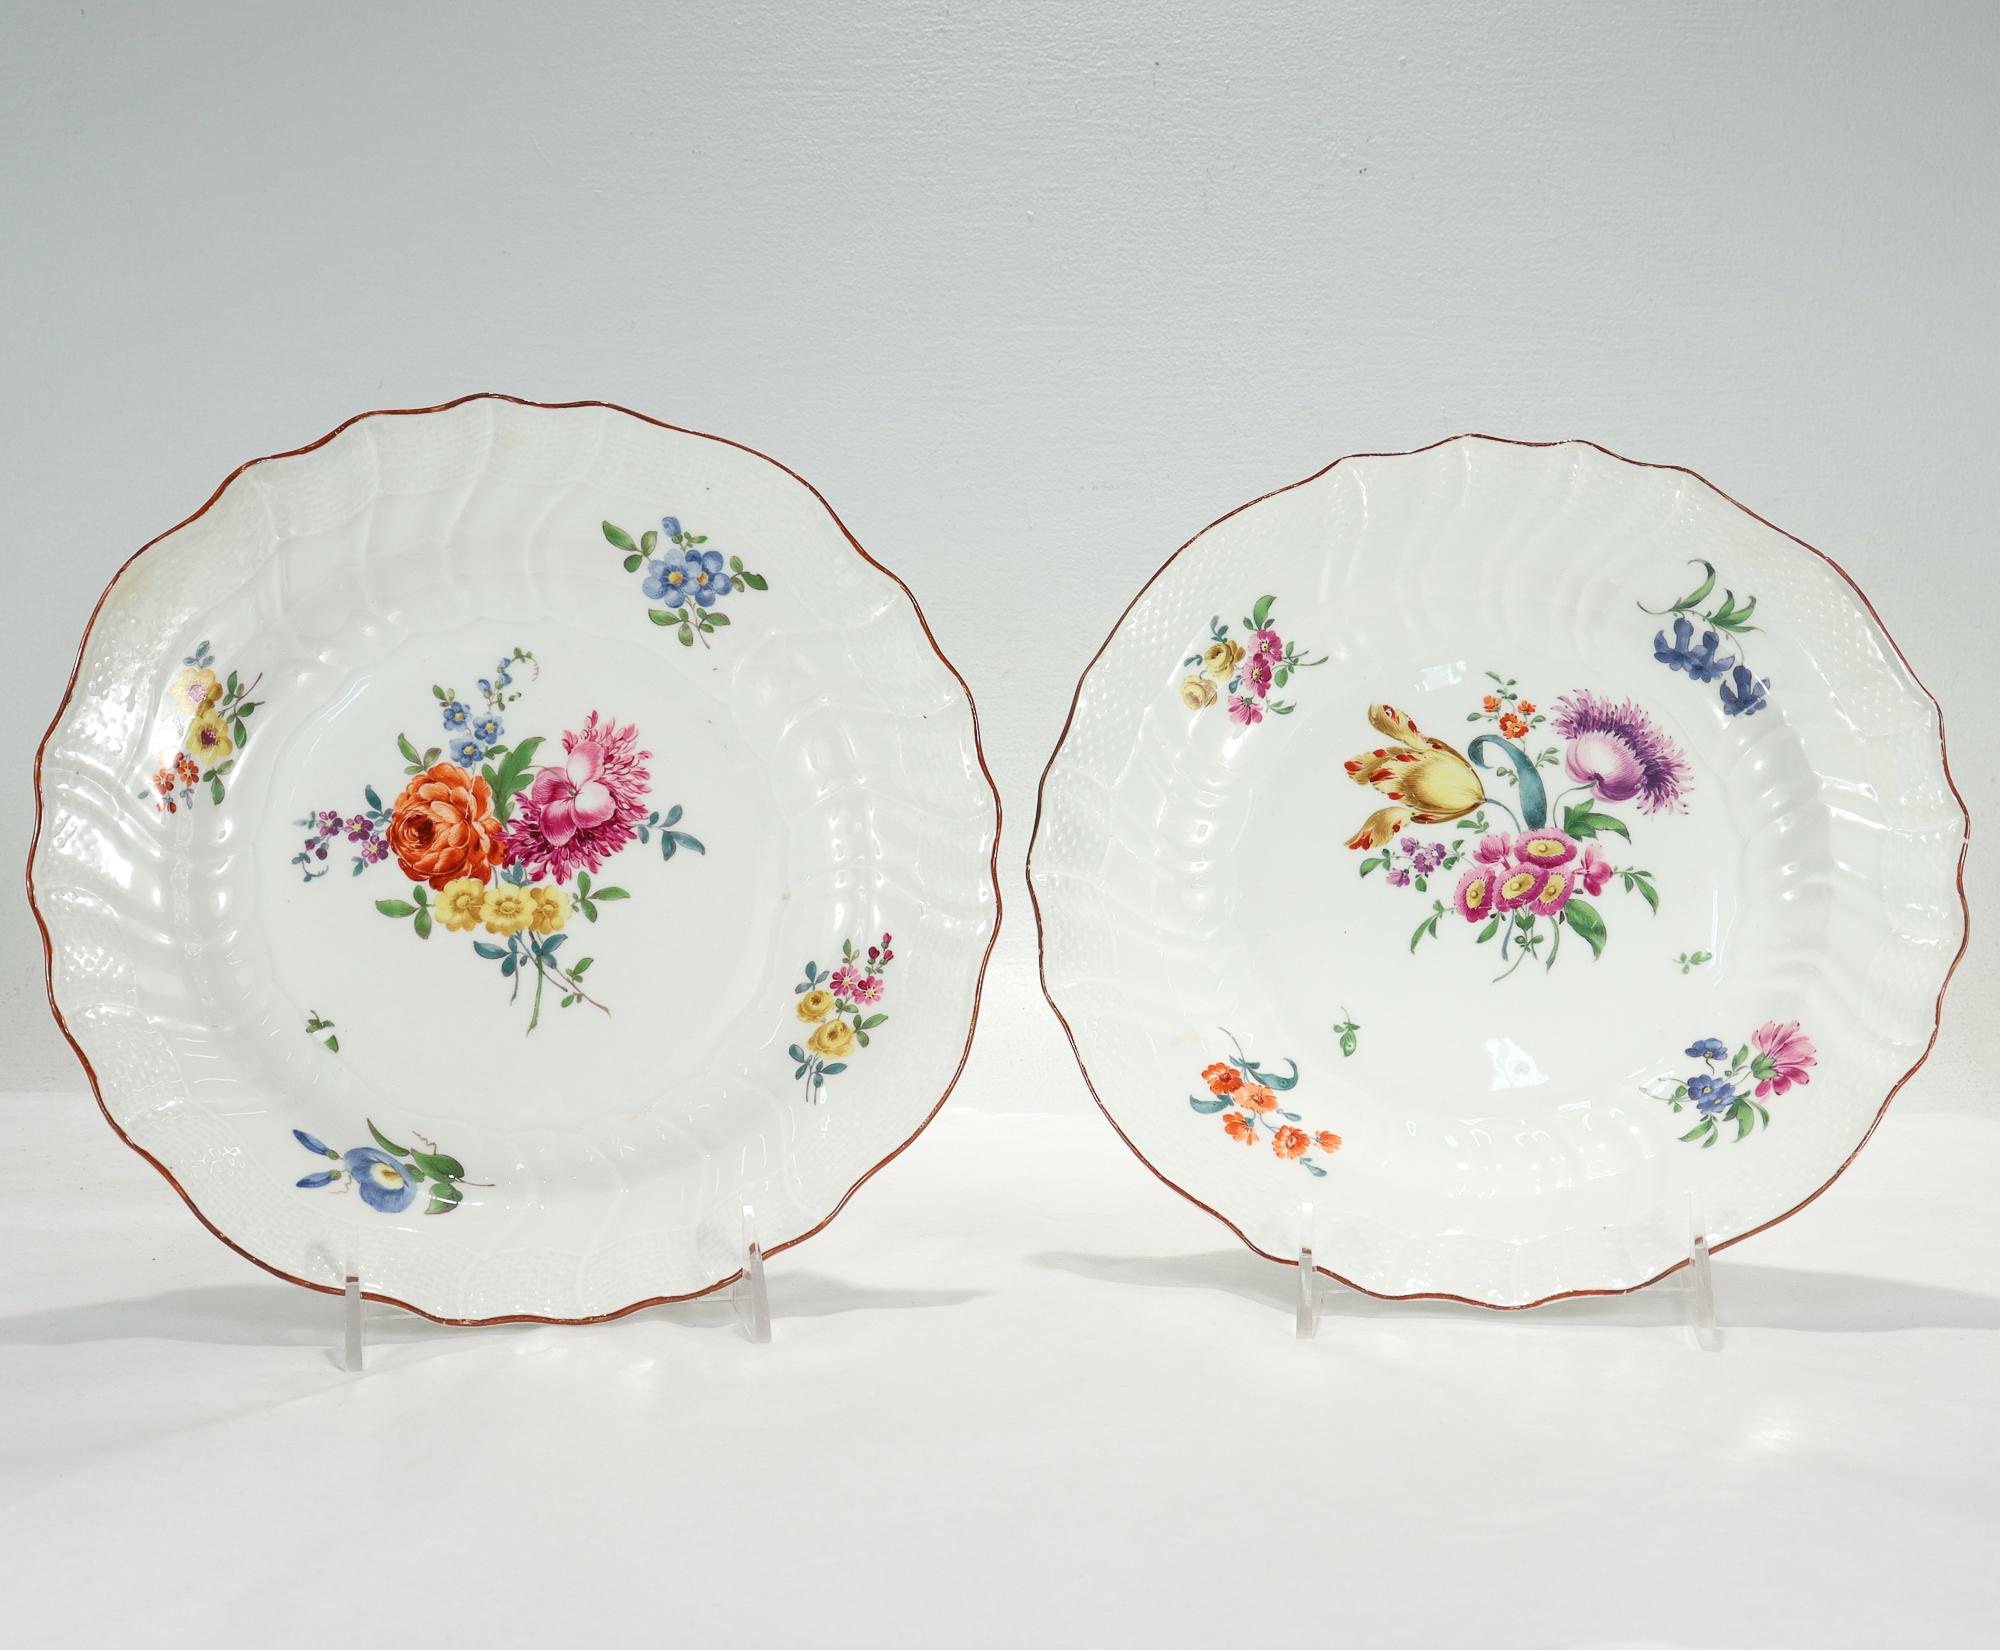 A fine pair of antique Neuozier pattern plates.

By the Royal Meissen Porcelain Manufactory.

Decorated with Deutsche Blumen floral sprays to the center and sides including roses, tulips, morning glories, and other various flowers. 

The